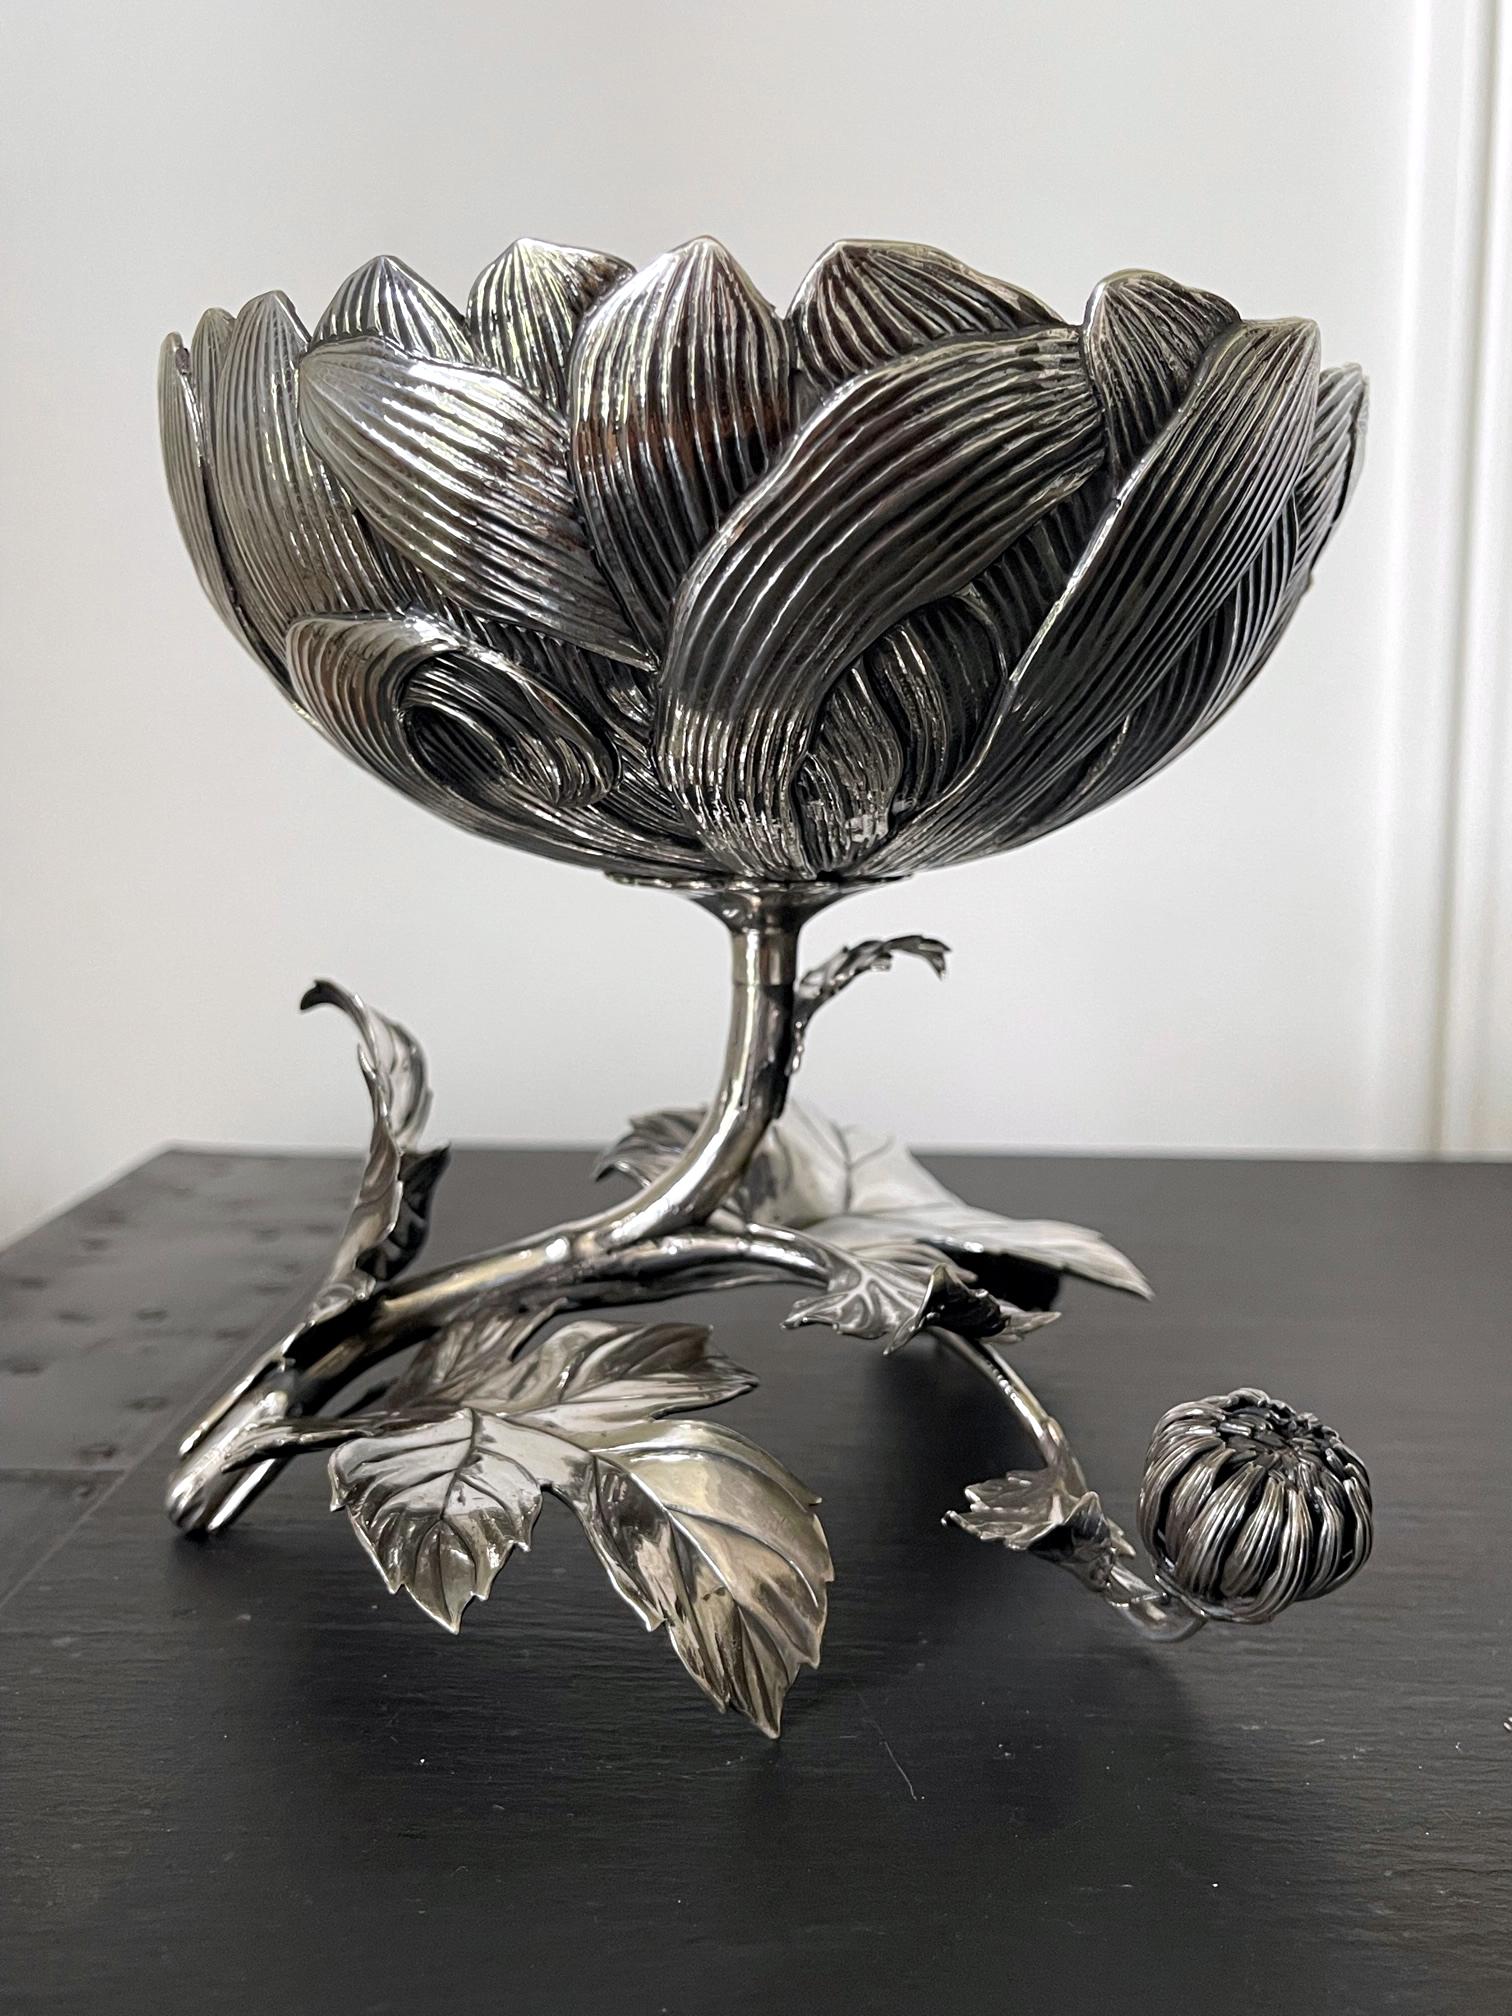 An exquisite Japanese sterling silver ornamental bonbon dish, circa 1890-1900. The piece was rendered in the shape of a stemmed branch of chrysanthemum blossom and was made for export market. Both botanically realistic and stylish, the piece